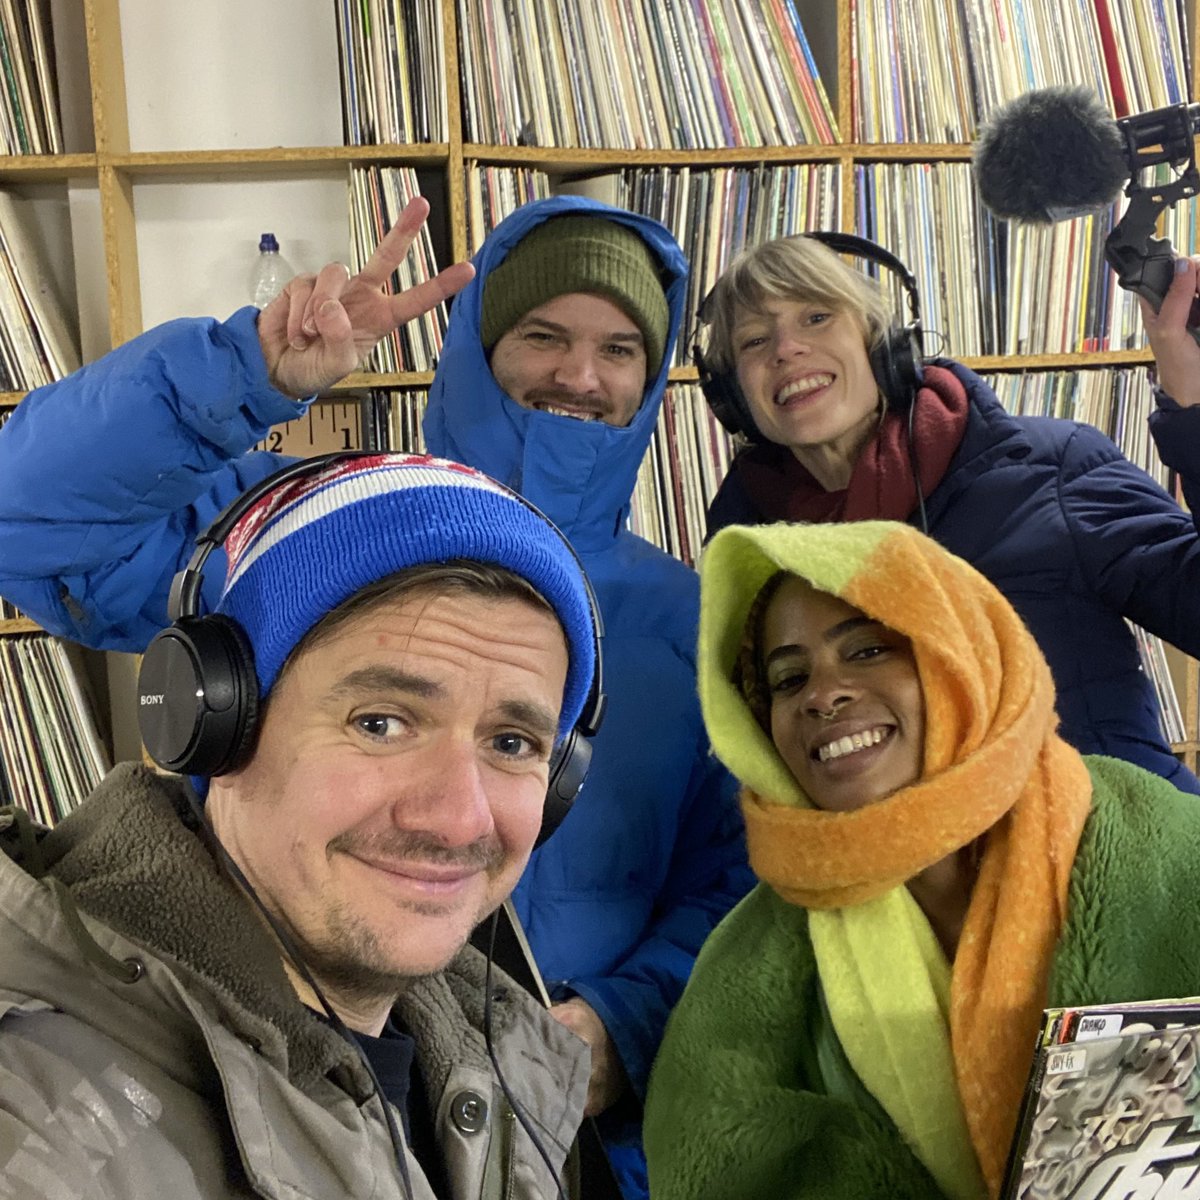 It’s a wrap! Final Peel Acres of the series (with the lovely @DJTashLC) available now on @BBCSounds Such a fab show to work on… despite the varied weather challenges ❄️☔️😶‍🌫️🥶 bbc.co.uk/sounds/play/m0…